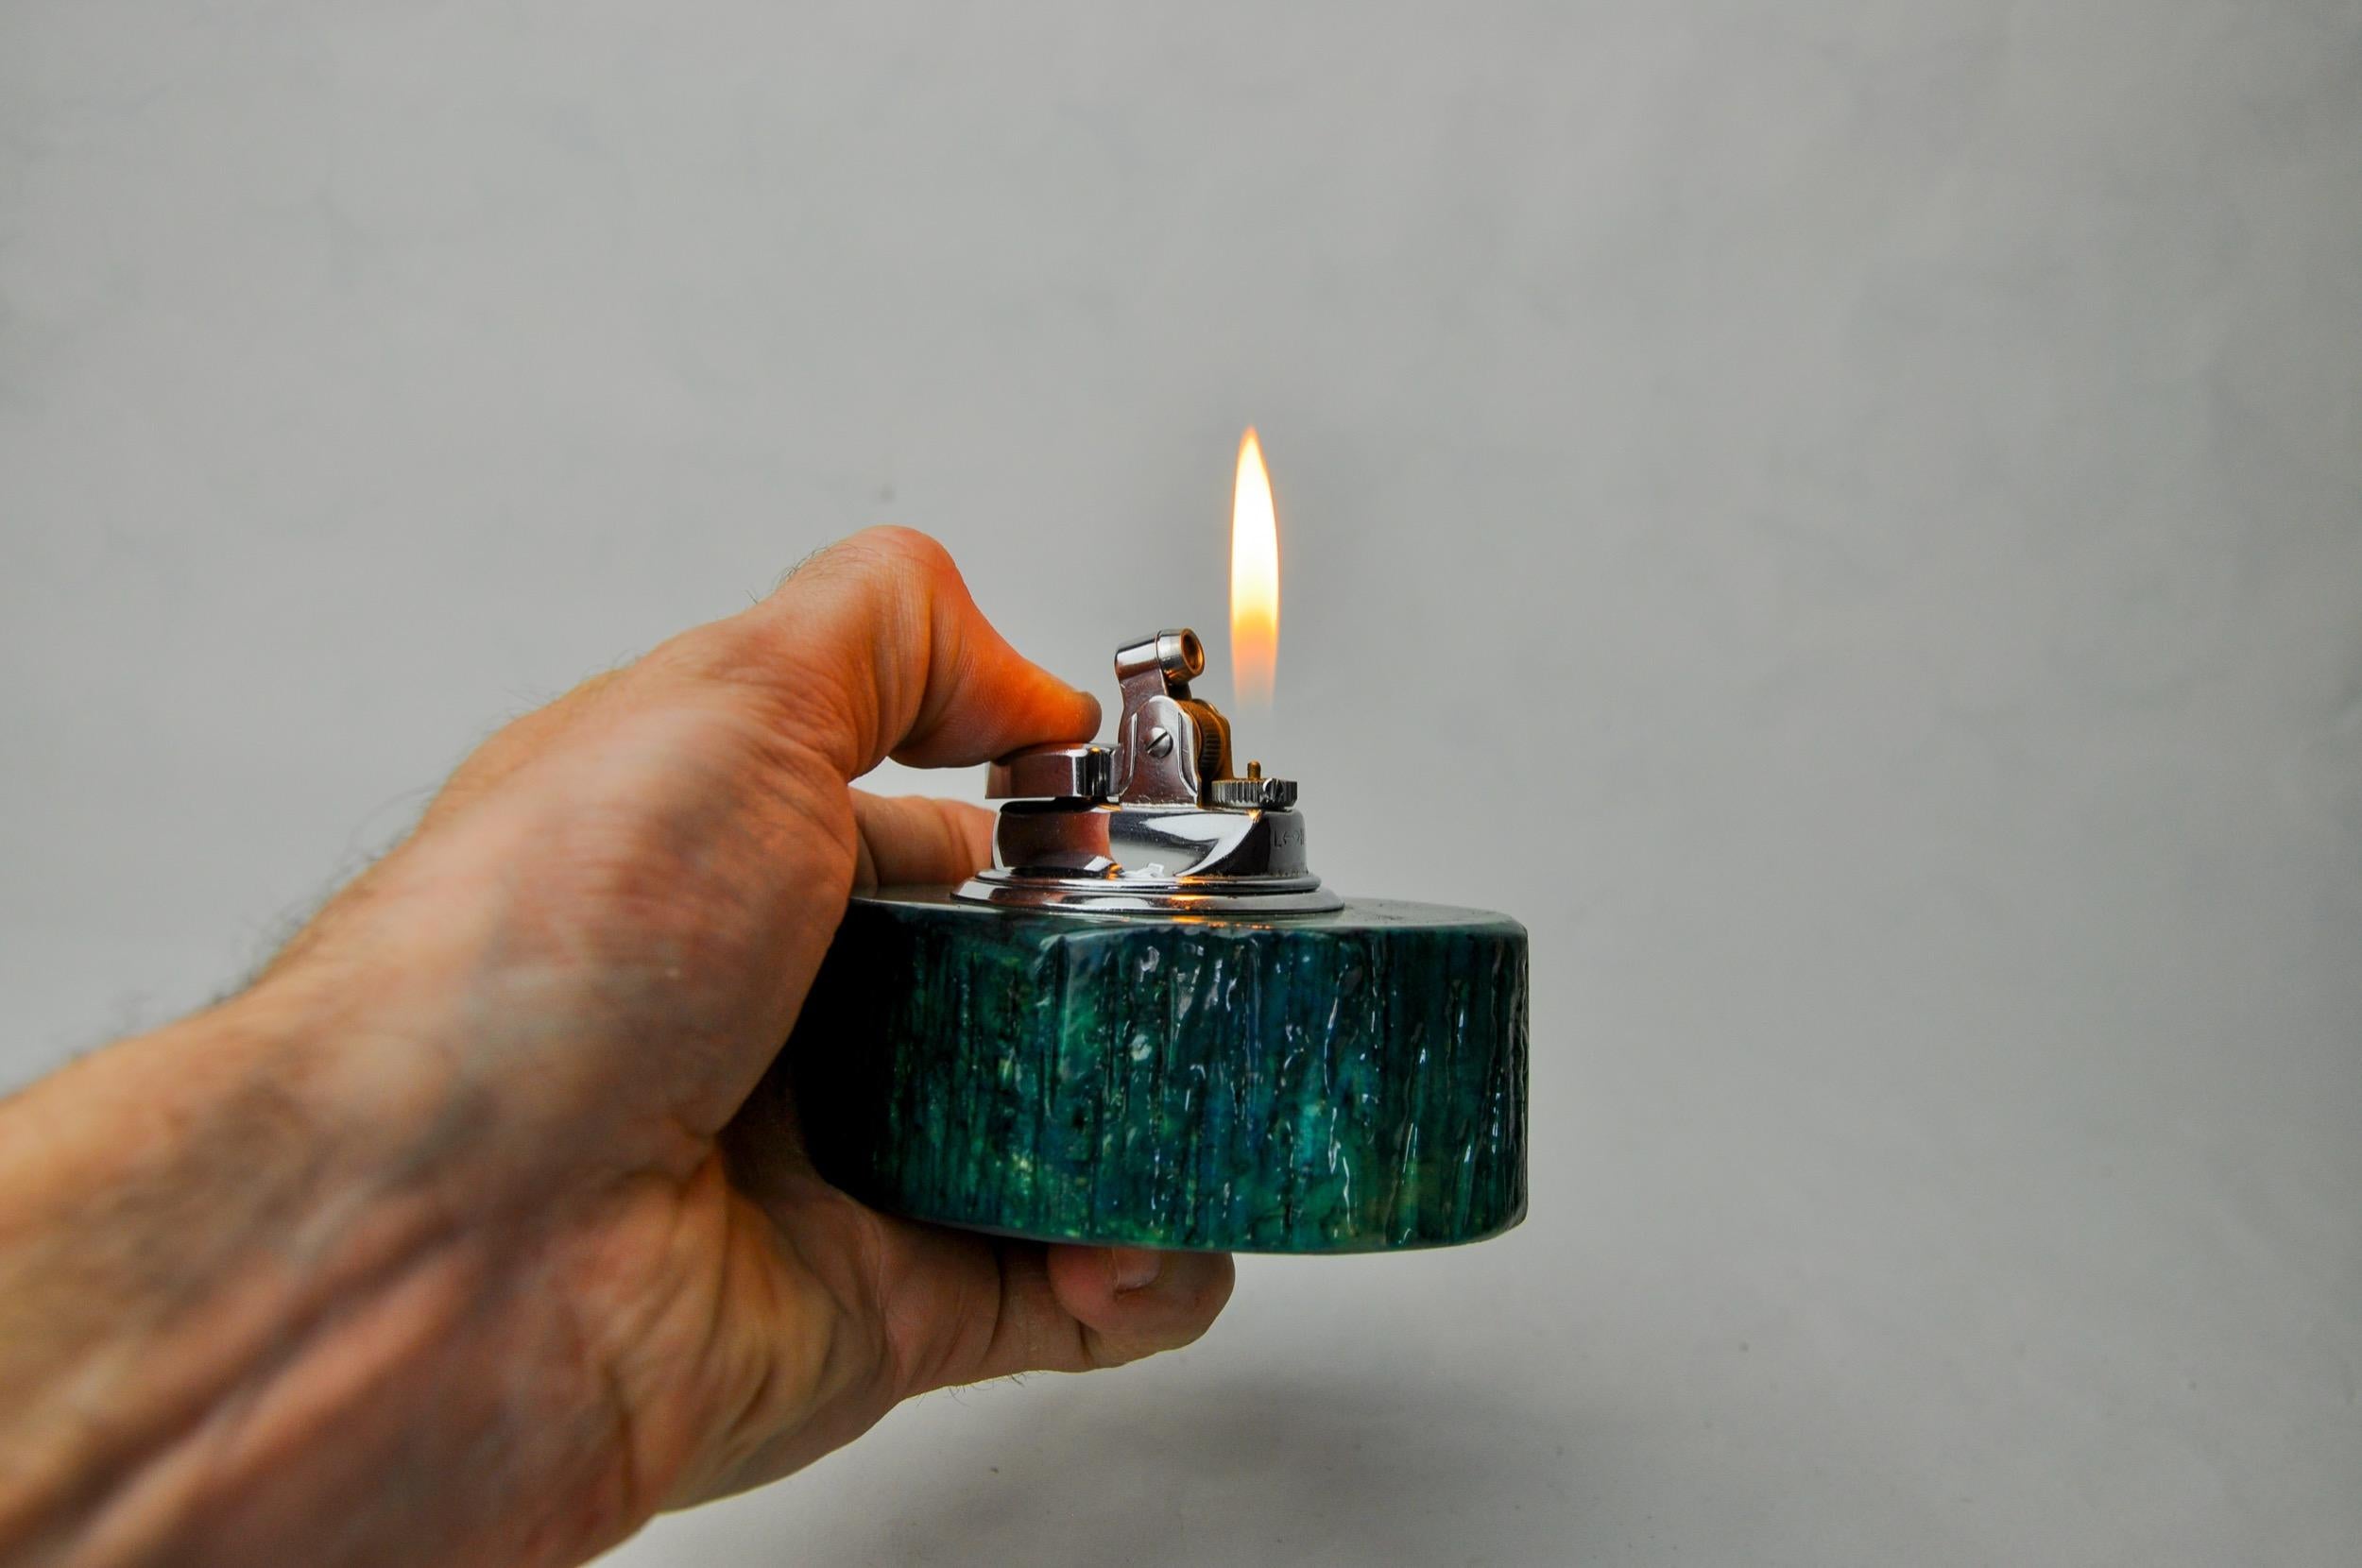 Superb and rare alabaster lighter designed and produced by romano bianchi in italy in the 1970s. Turquoise alabaster lighter produced by hand. Very nice state of conservation, original lighter revised by a professional. Decorative object that will